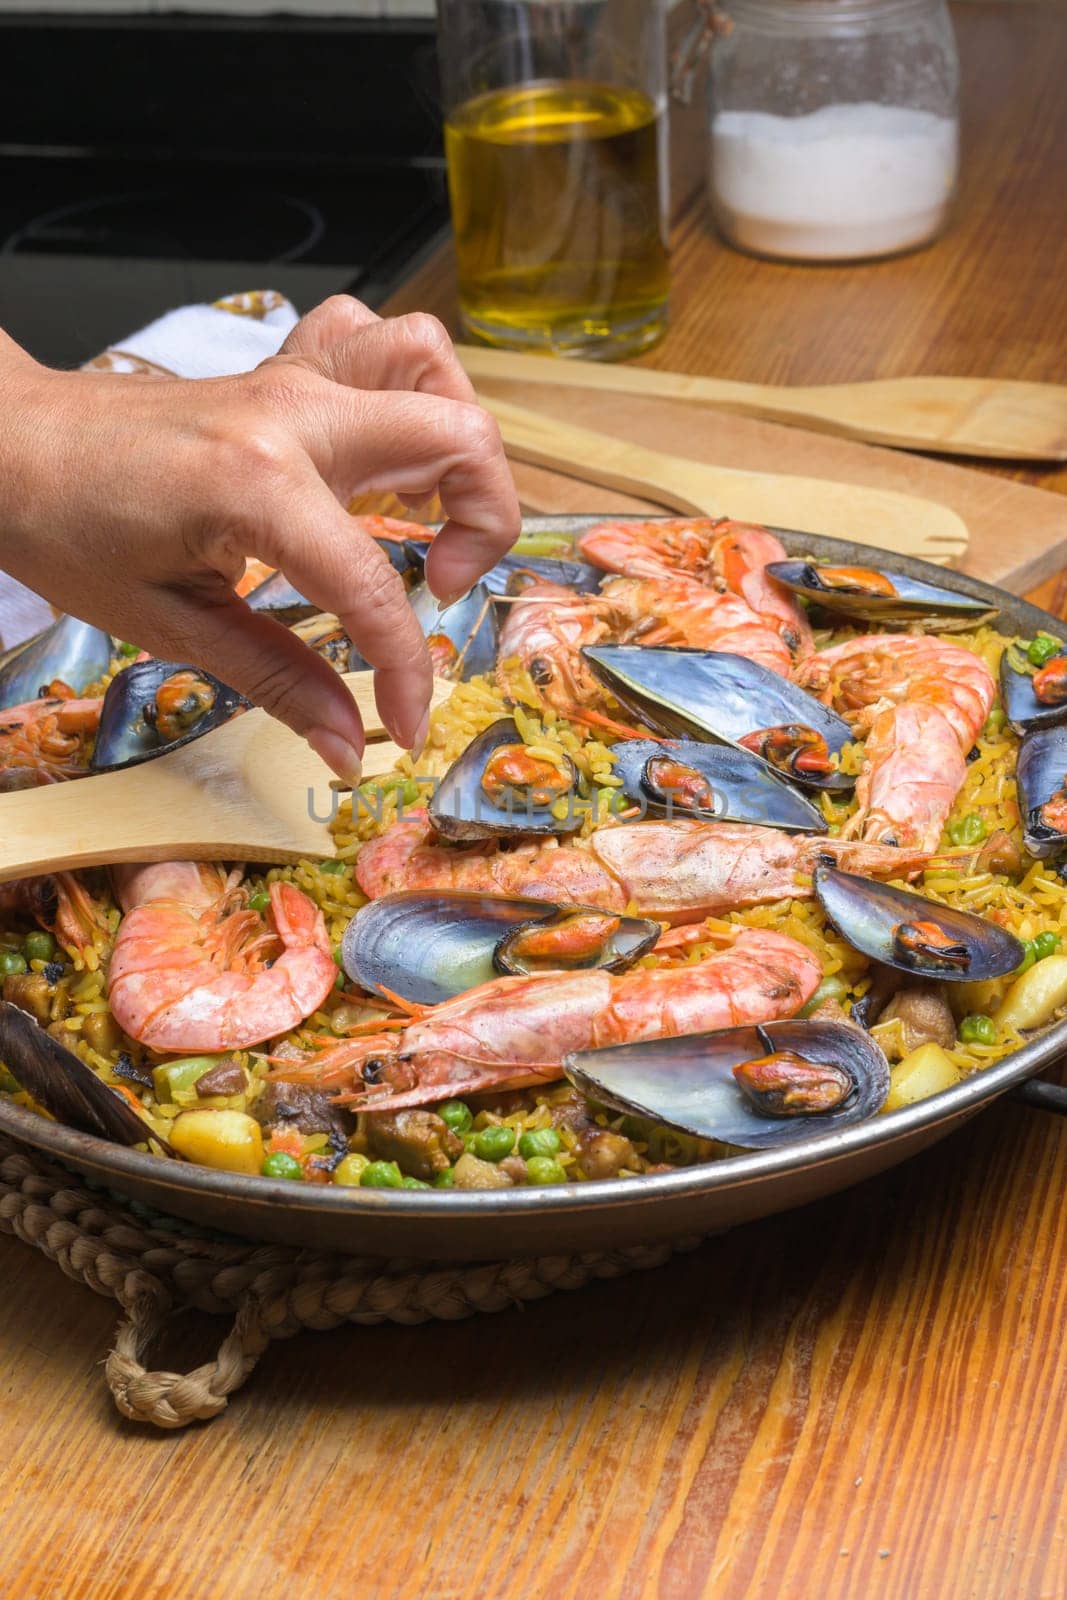 A hand serving seafood paella with prawns and mussels using a wooden spatula, typical Spanish cuisine, Majorca, Balearic Islands, Spain,